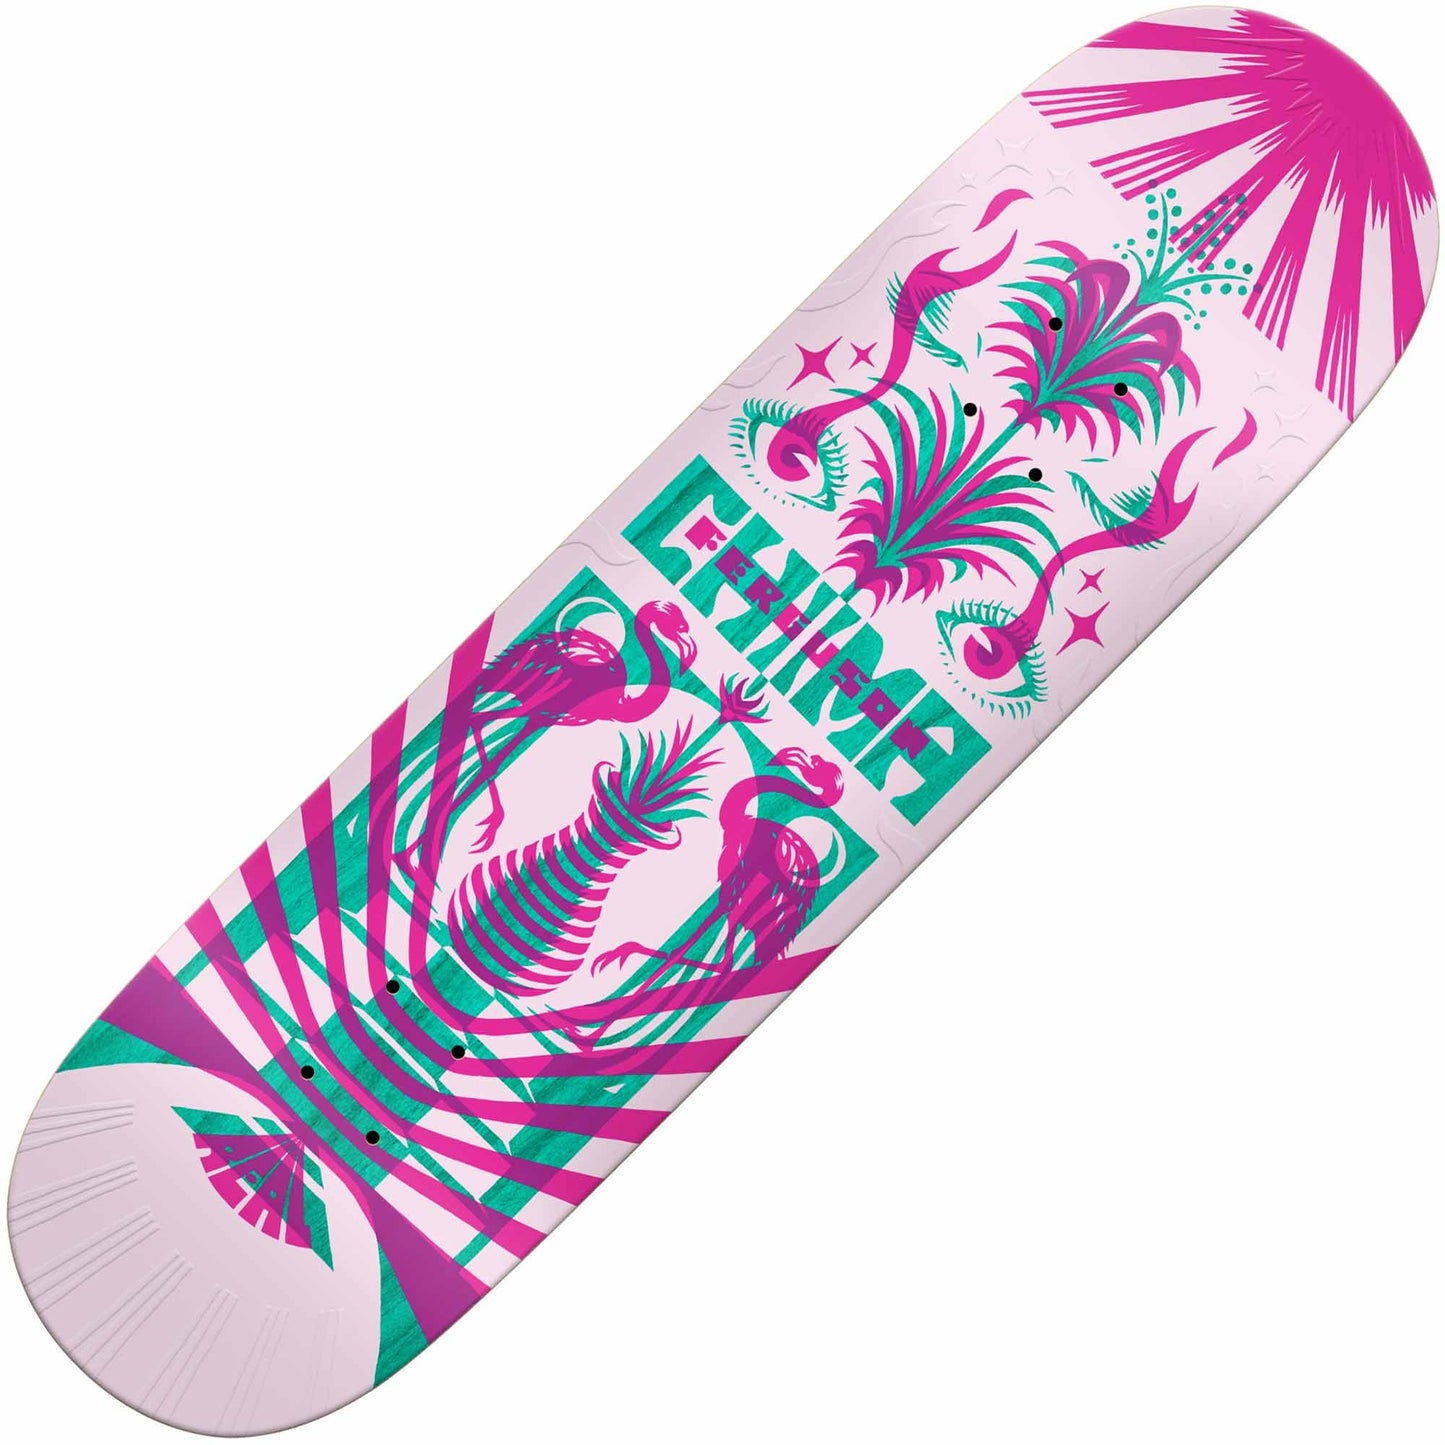 Real Chima Passages Deck (8.38") - Tiki Room Skateboards - 1